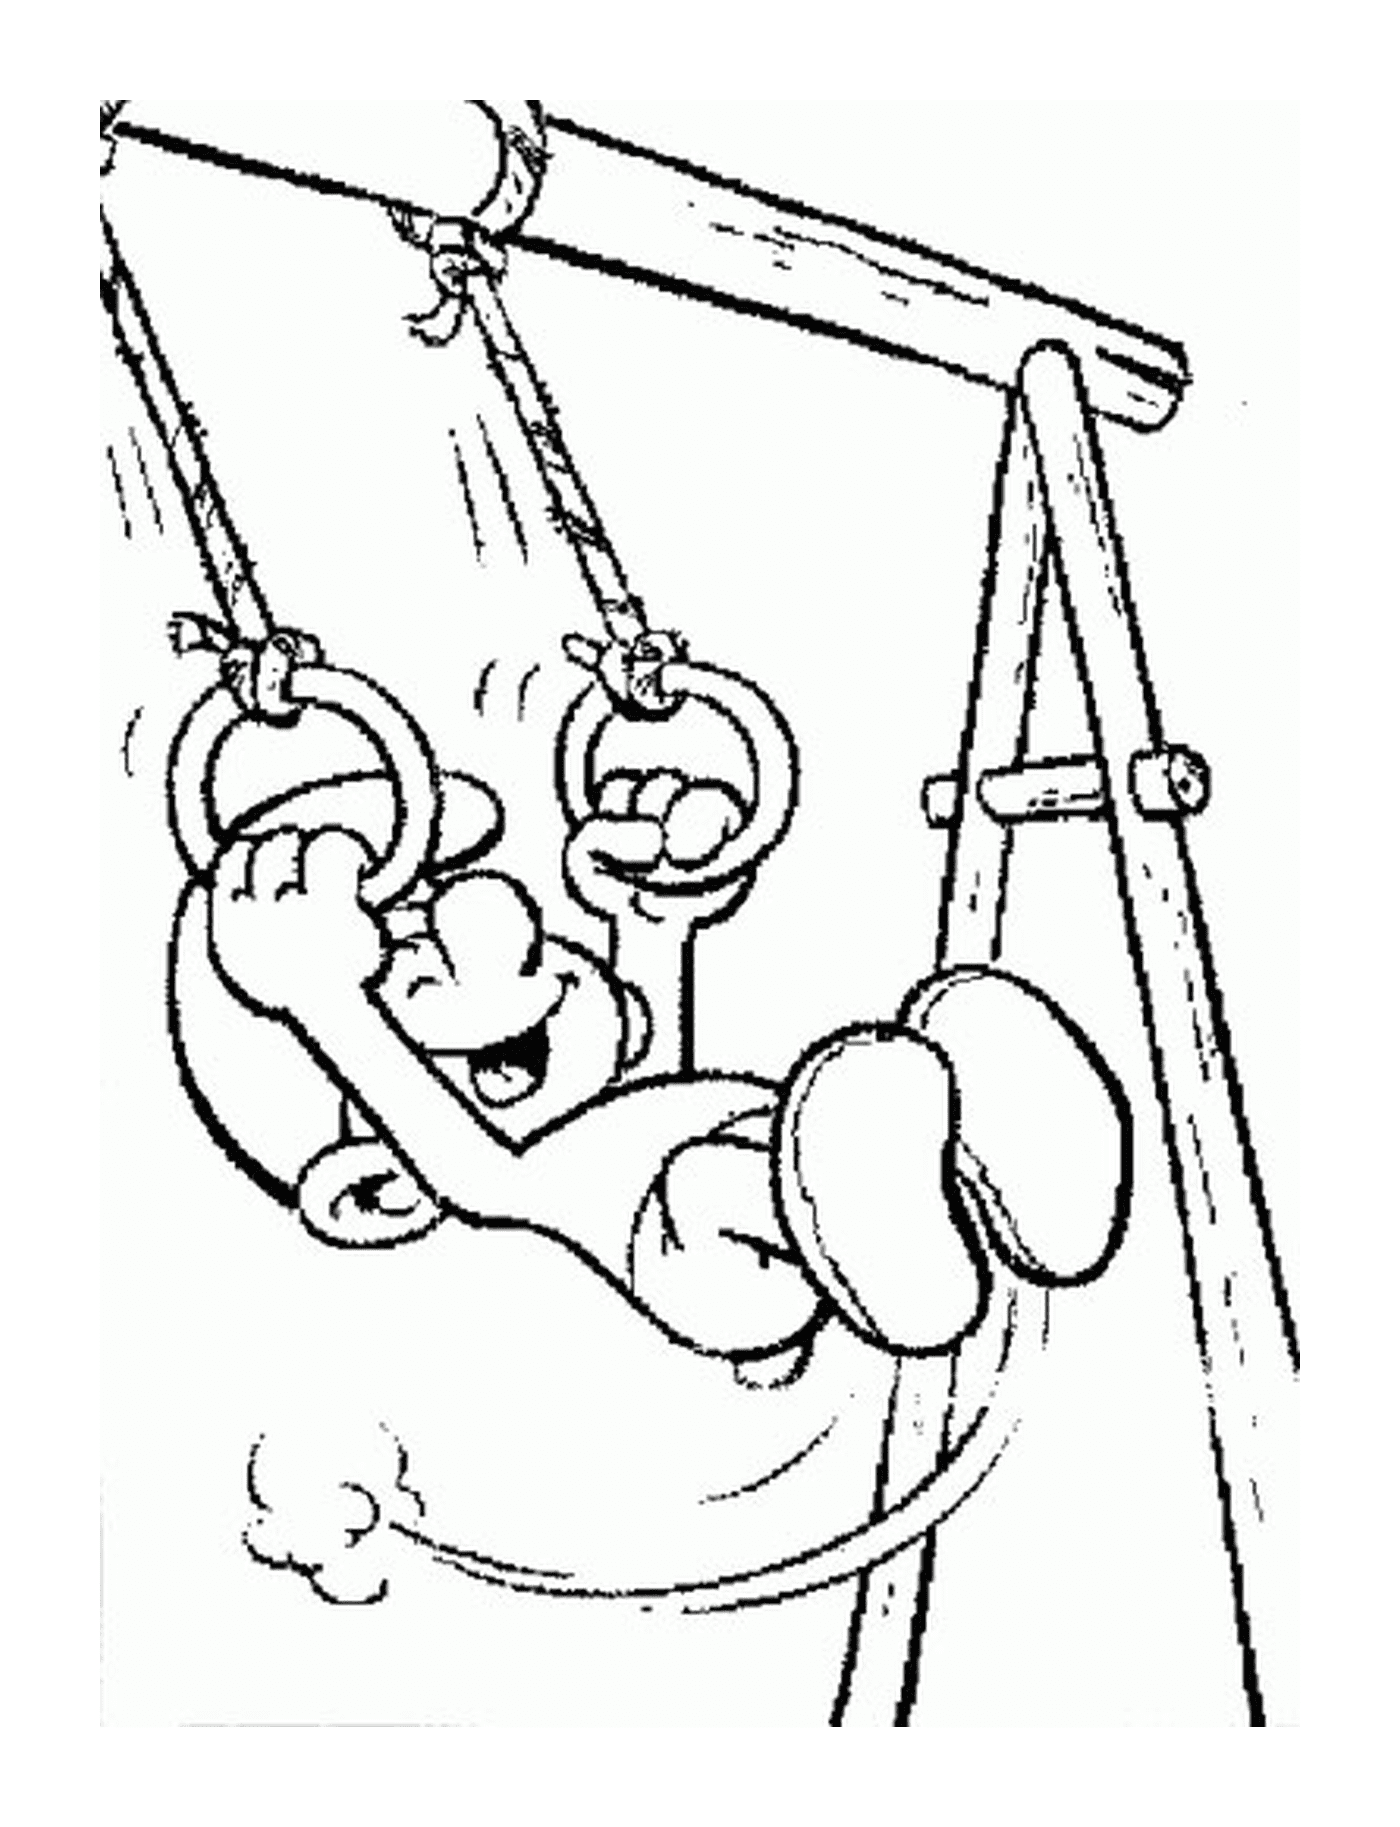  A character swinging on a swing 